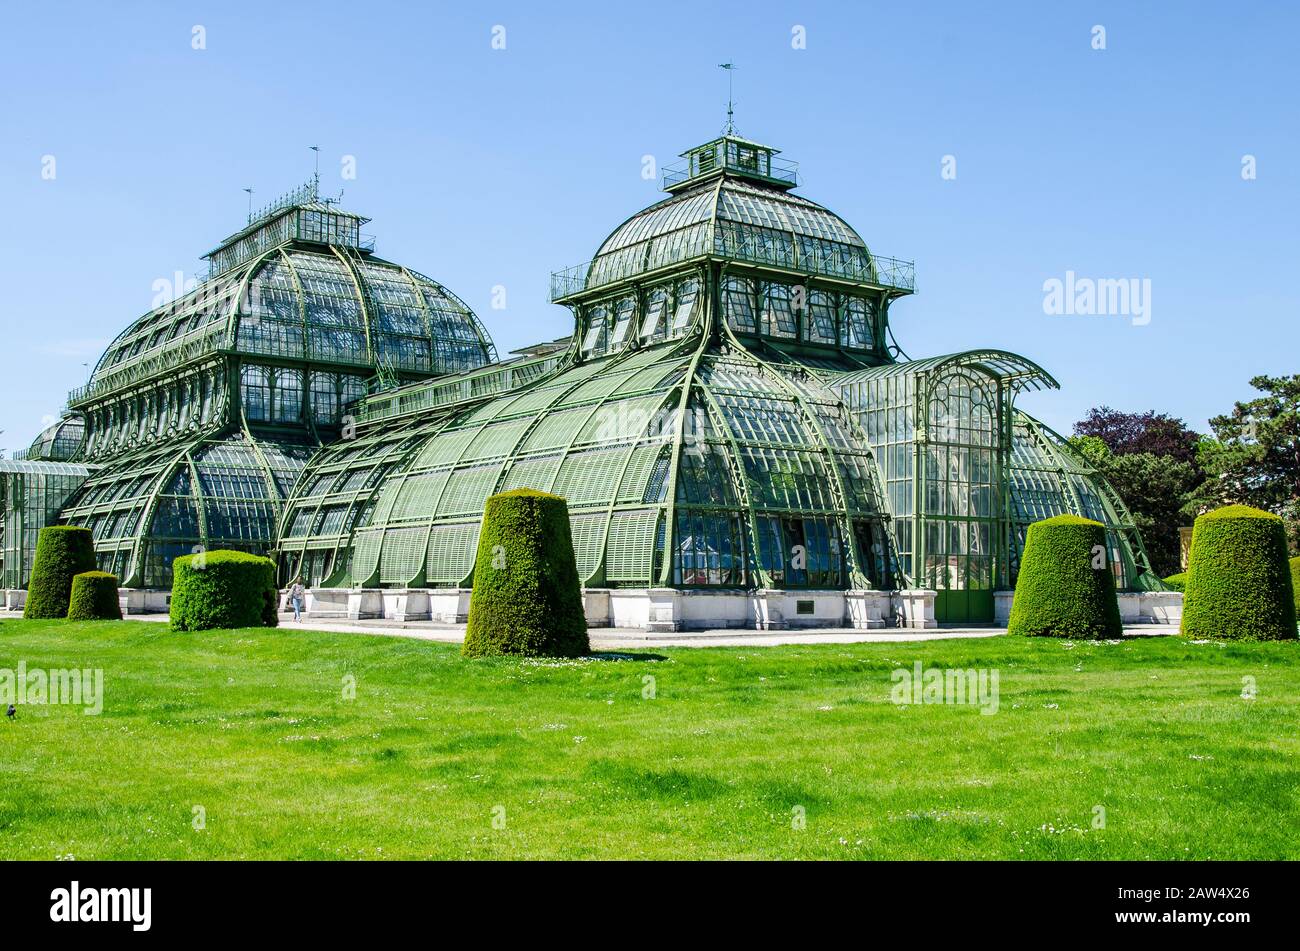 The Palmenhaus Schönbrunn is a large greenhouse in Vienna, It is the most prominent of the four greenhouses in Schönbrunn Palace Park, Stock Photo